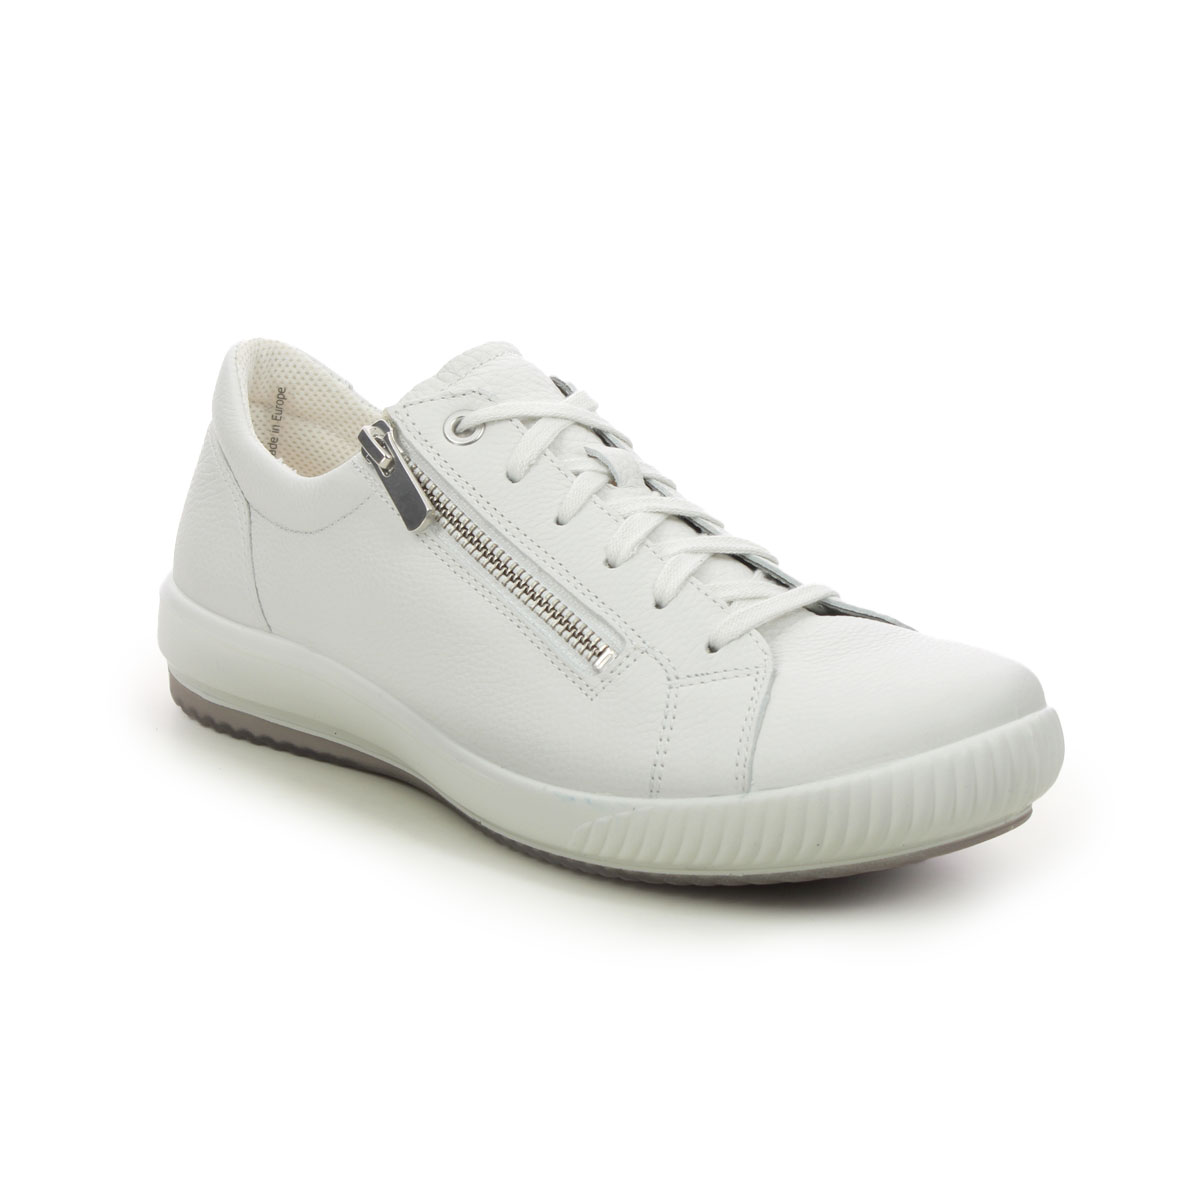 Legero Tanaro 5 Zip White Womens lacing shoes 2001162-1000 in a Plain Leather in Size 7